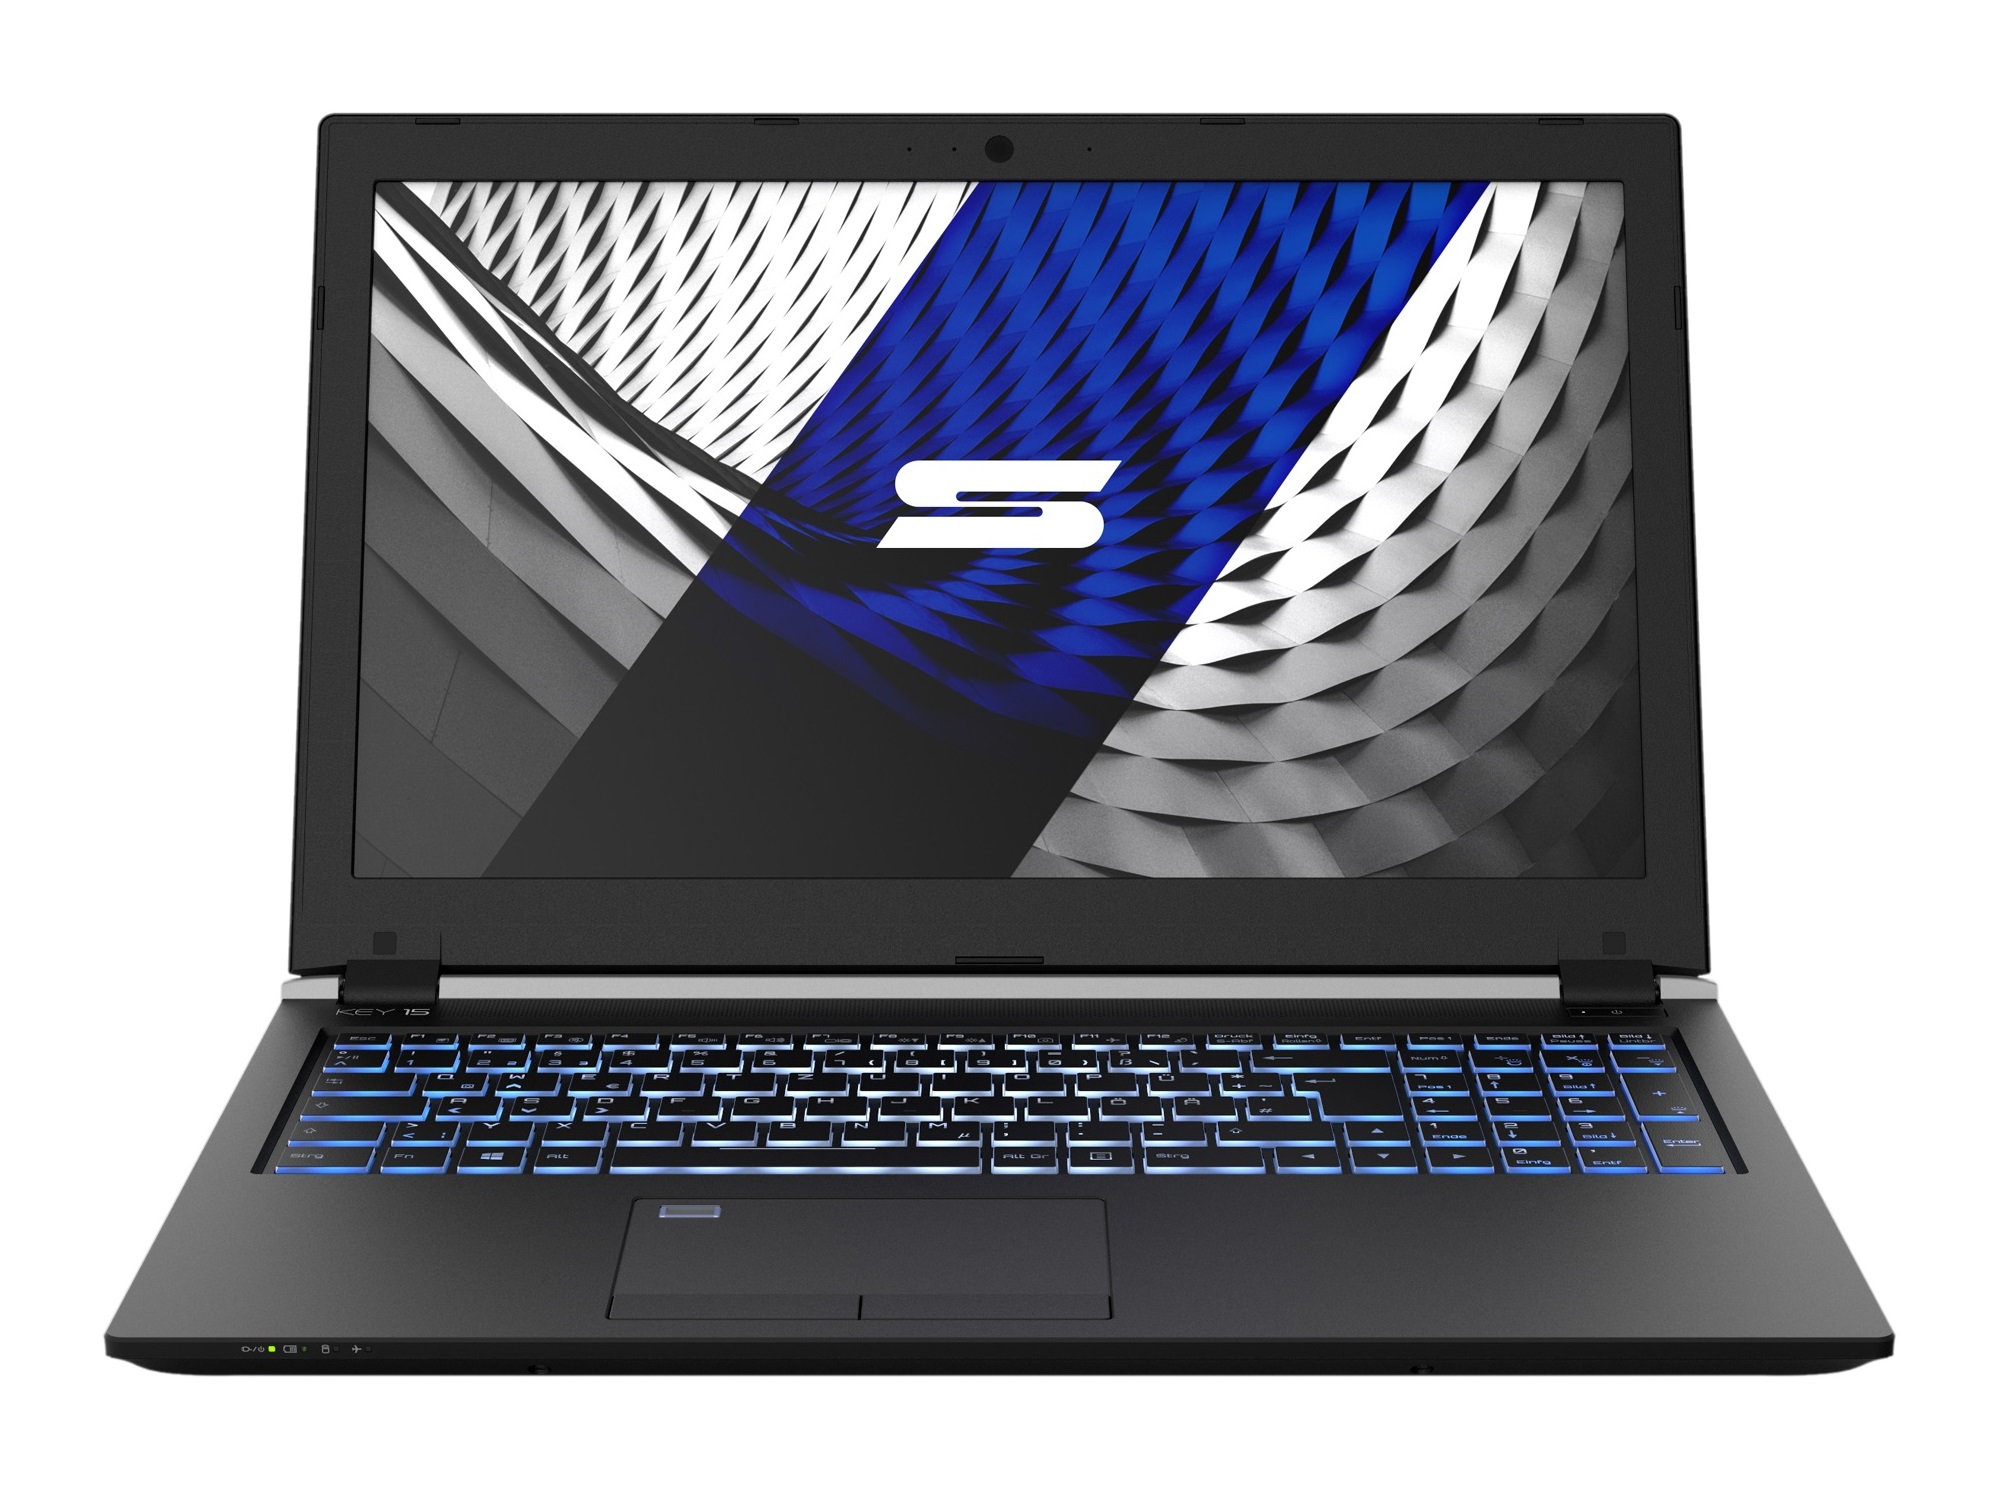 Clevo gaming laptops